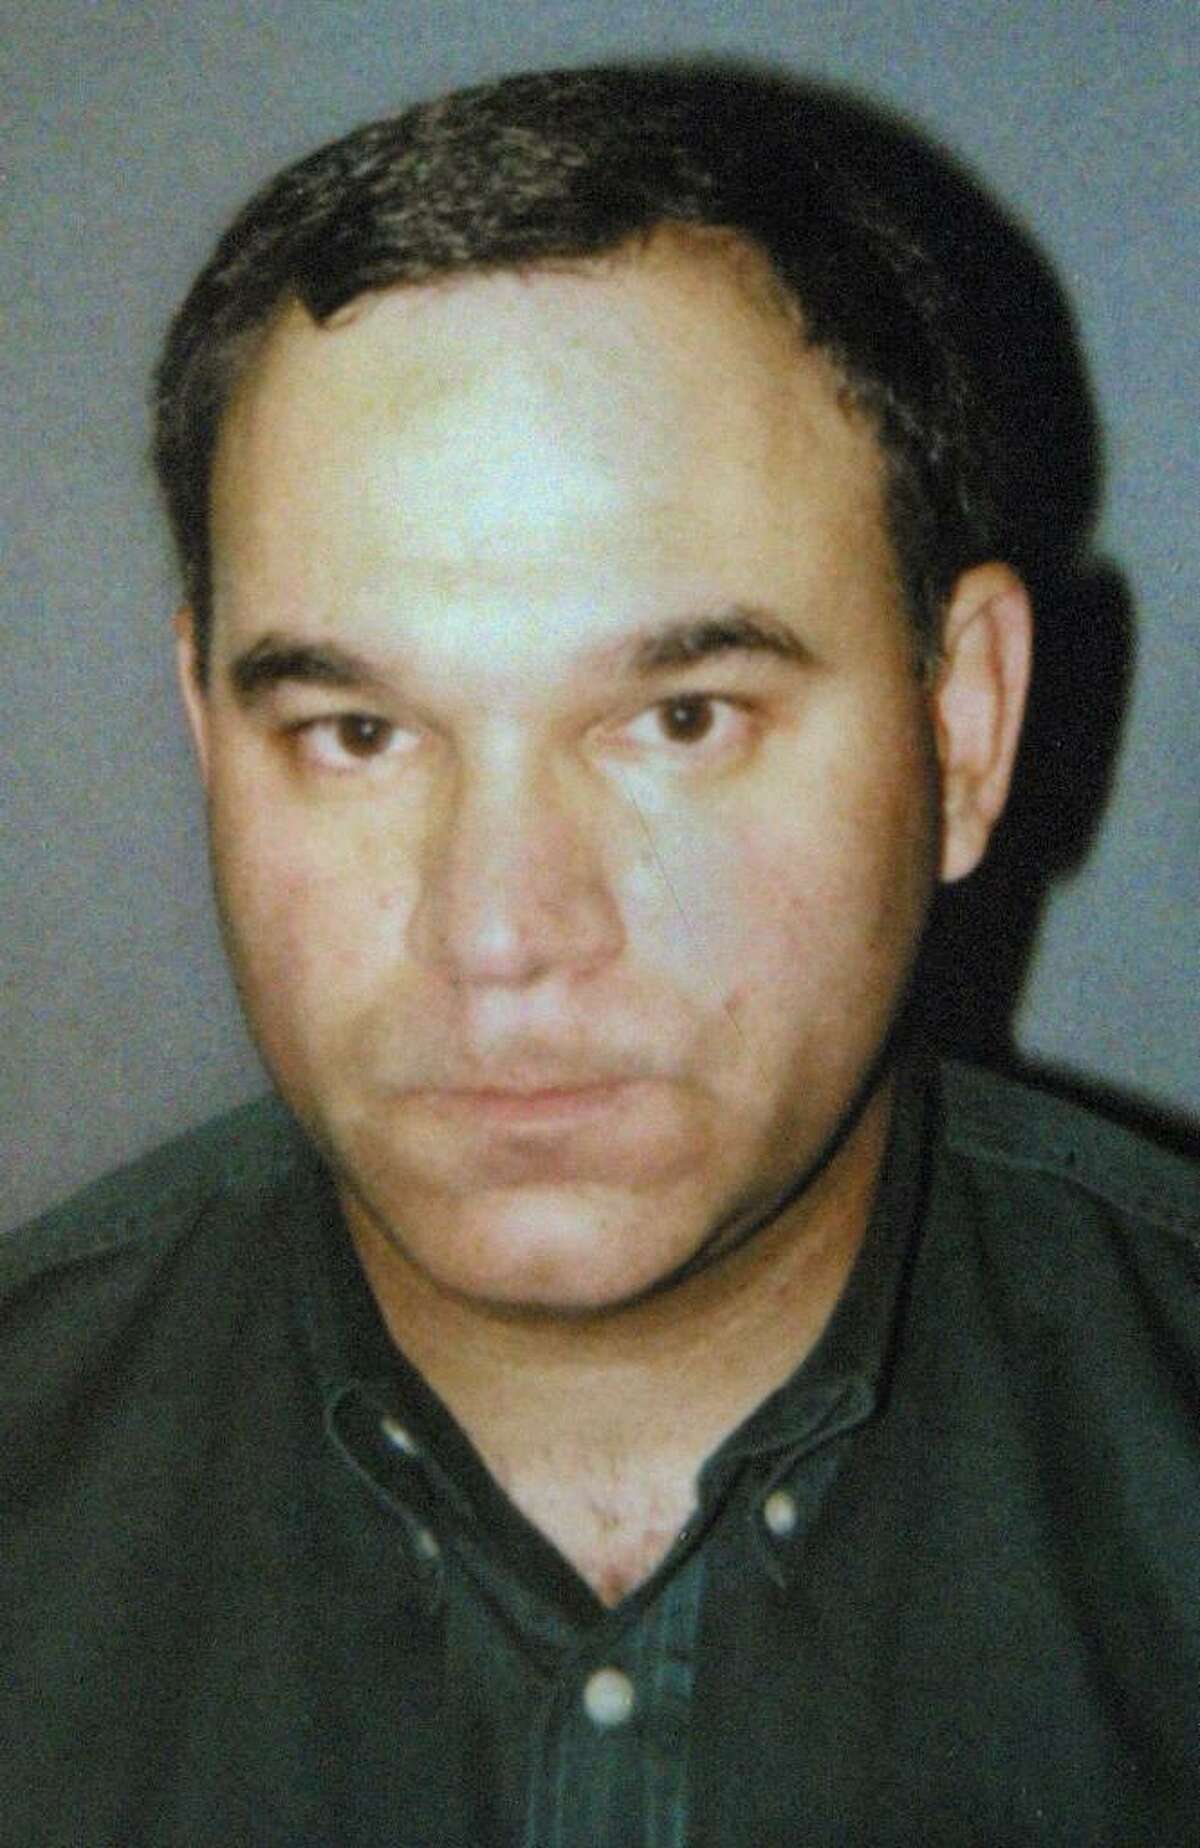 The Rev. John J. Castaldo is shown in a photo supplied by the district attorney's office of Westchester County, N.Y., Friday, May 25, 2001. Castaldo was arrested for engaging in sexually explicit online conversations with someone he believed was a 14-year-old boy, District Attorney Jeanine Pirro said. (AP Photo/Courtesy Westchester district attorney's office)